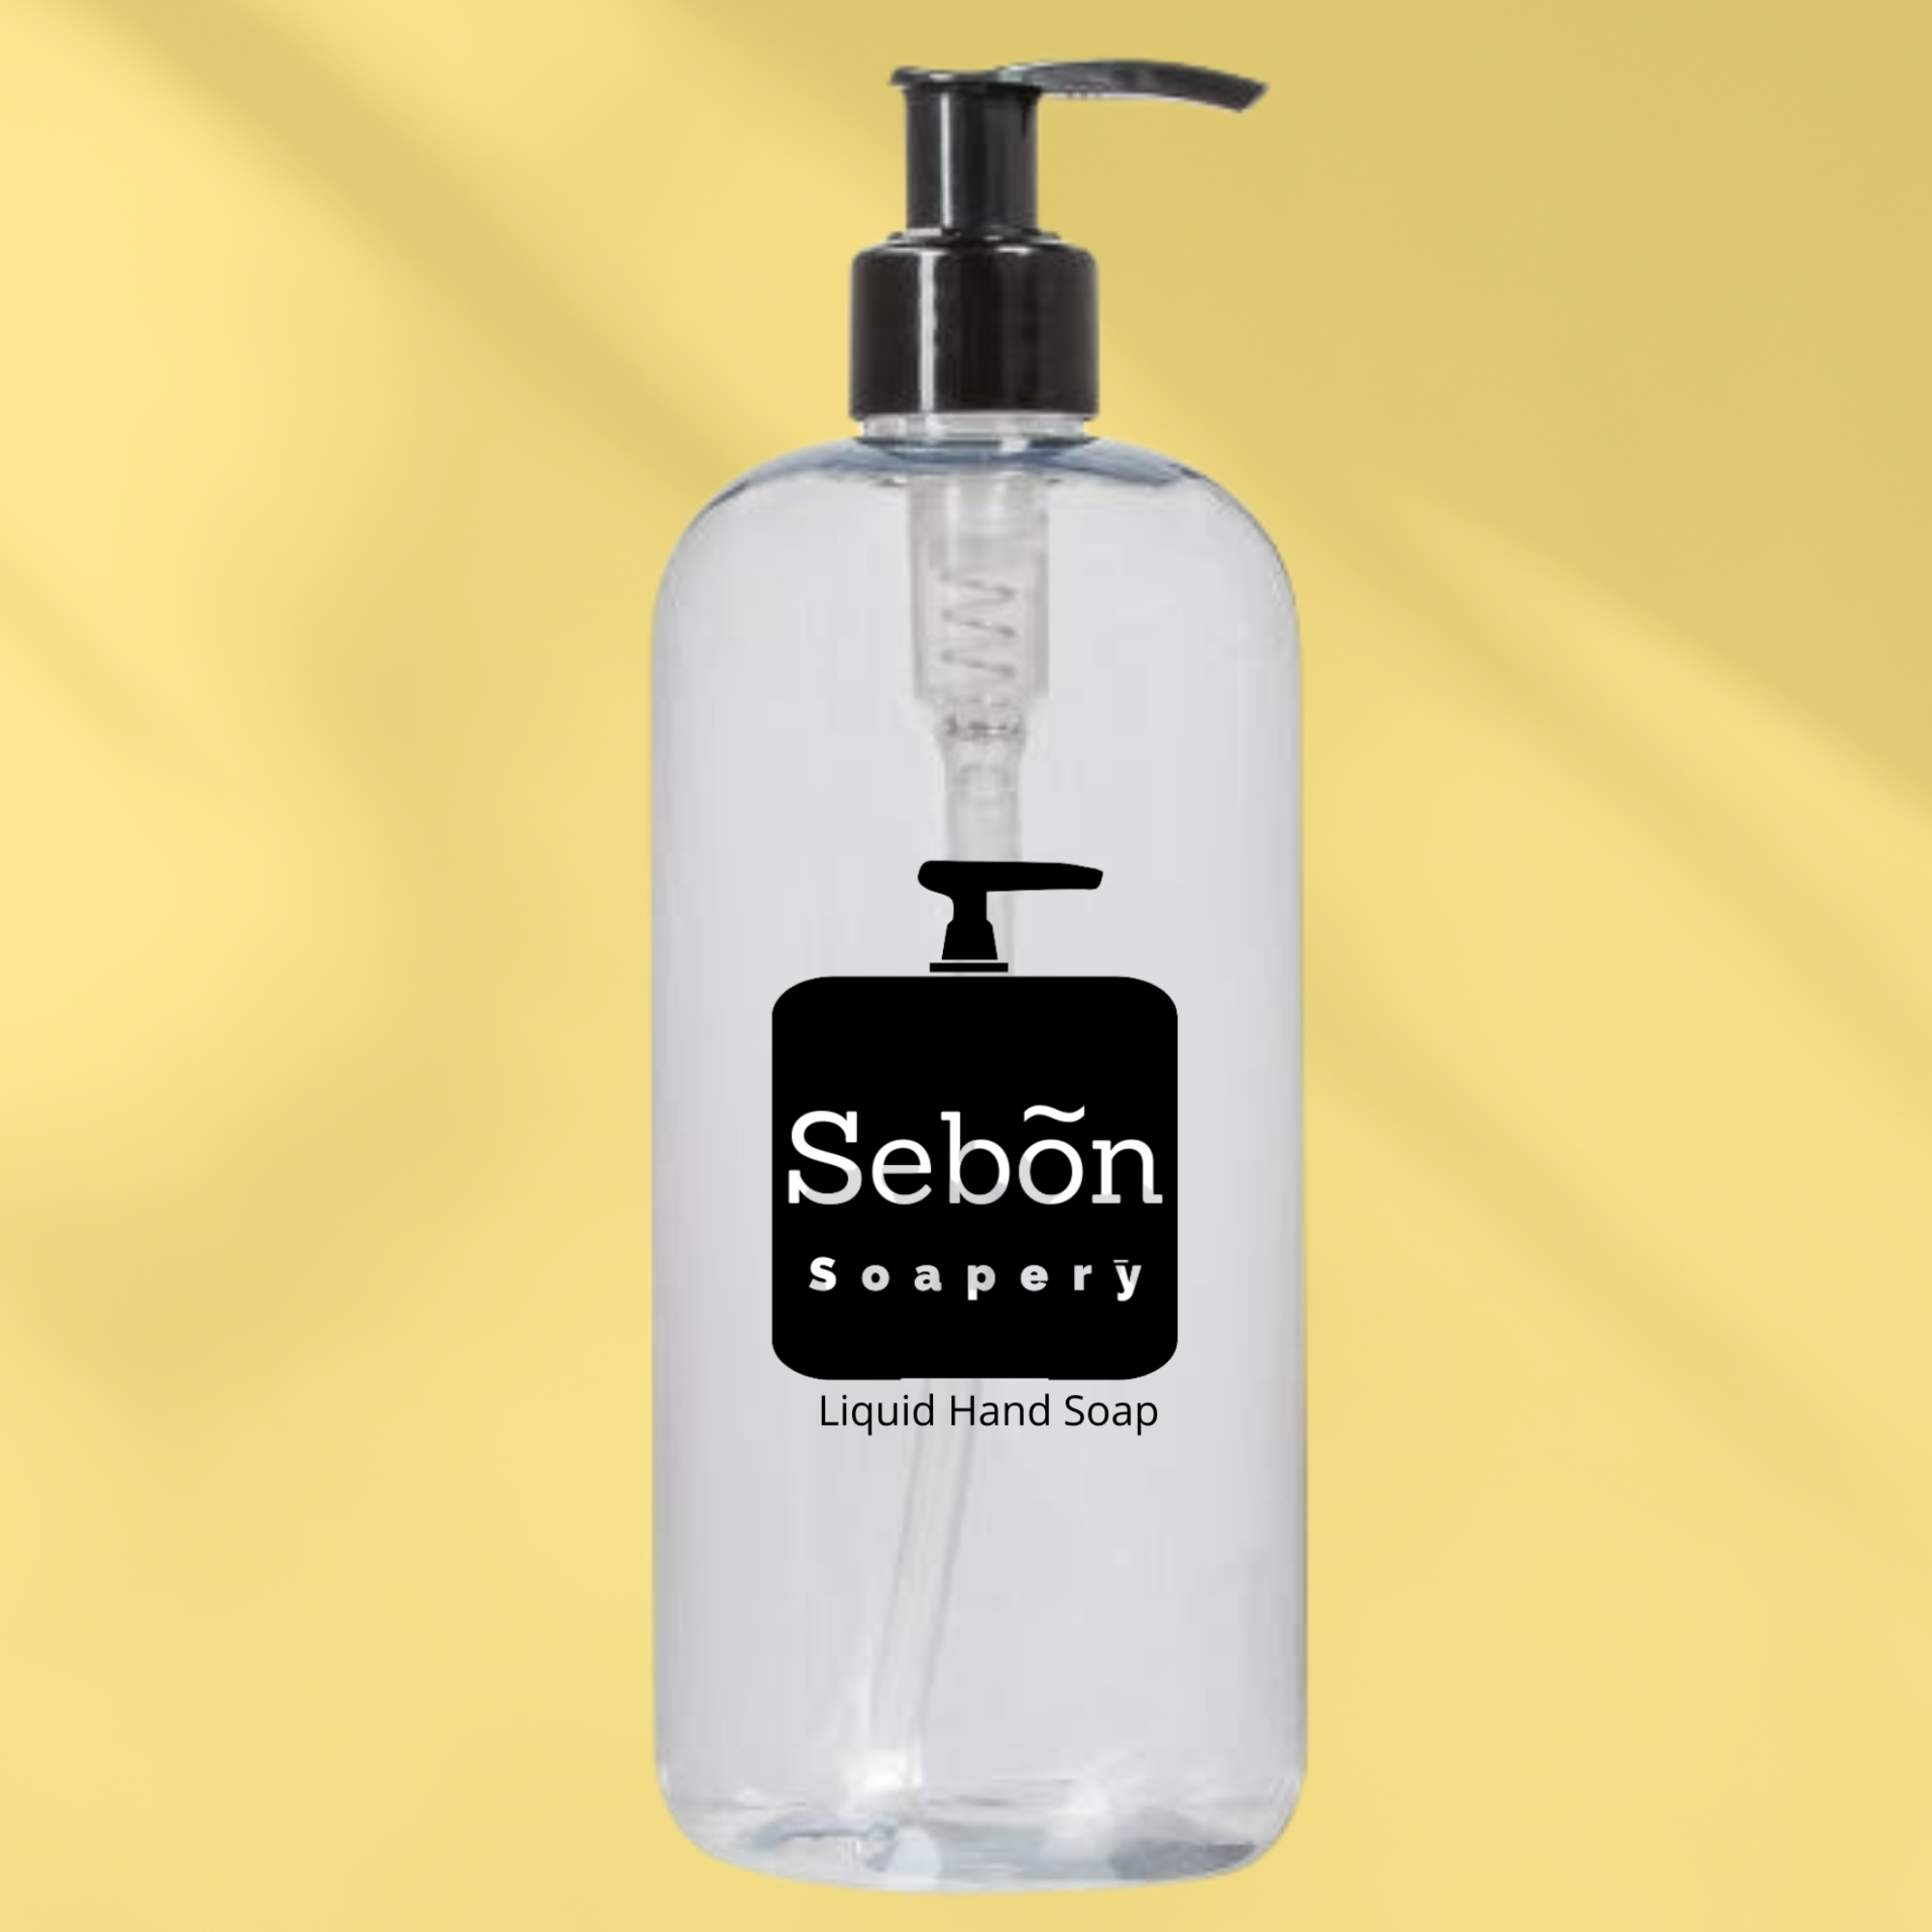 Sebon Marshmallow Rice Treat Scented Liquid Hand Soap with Olive Oil